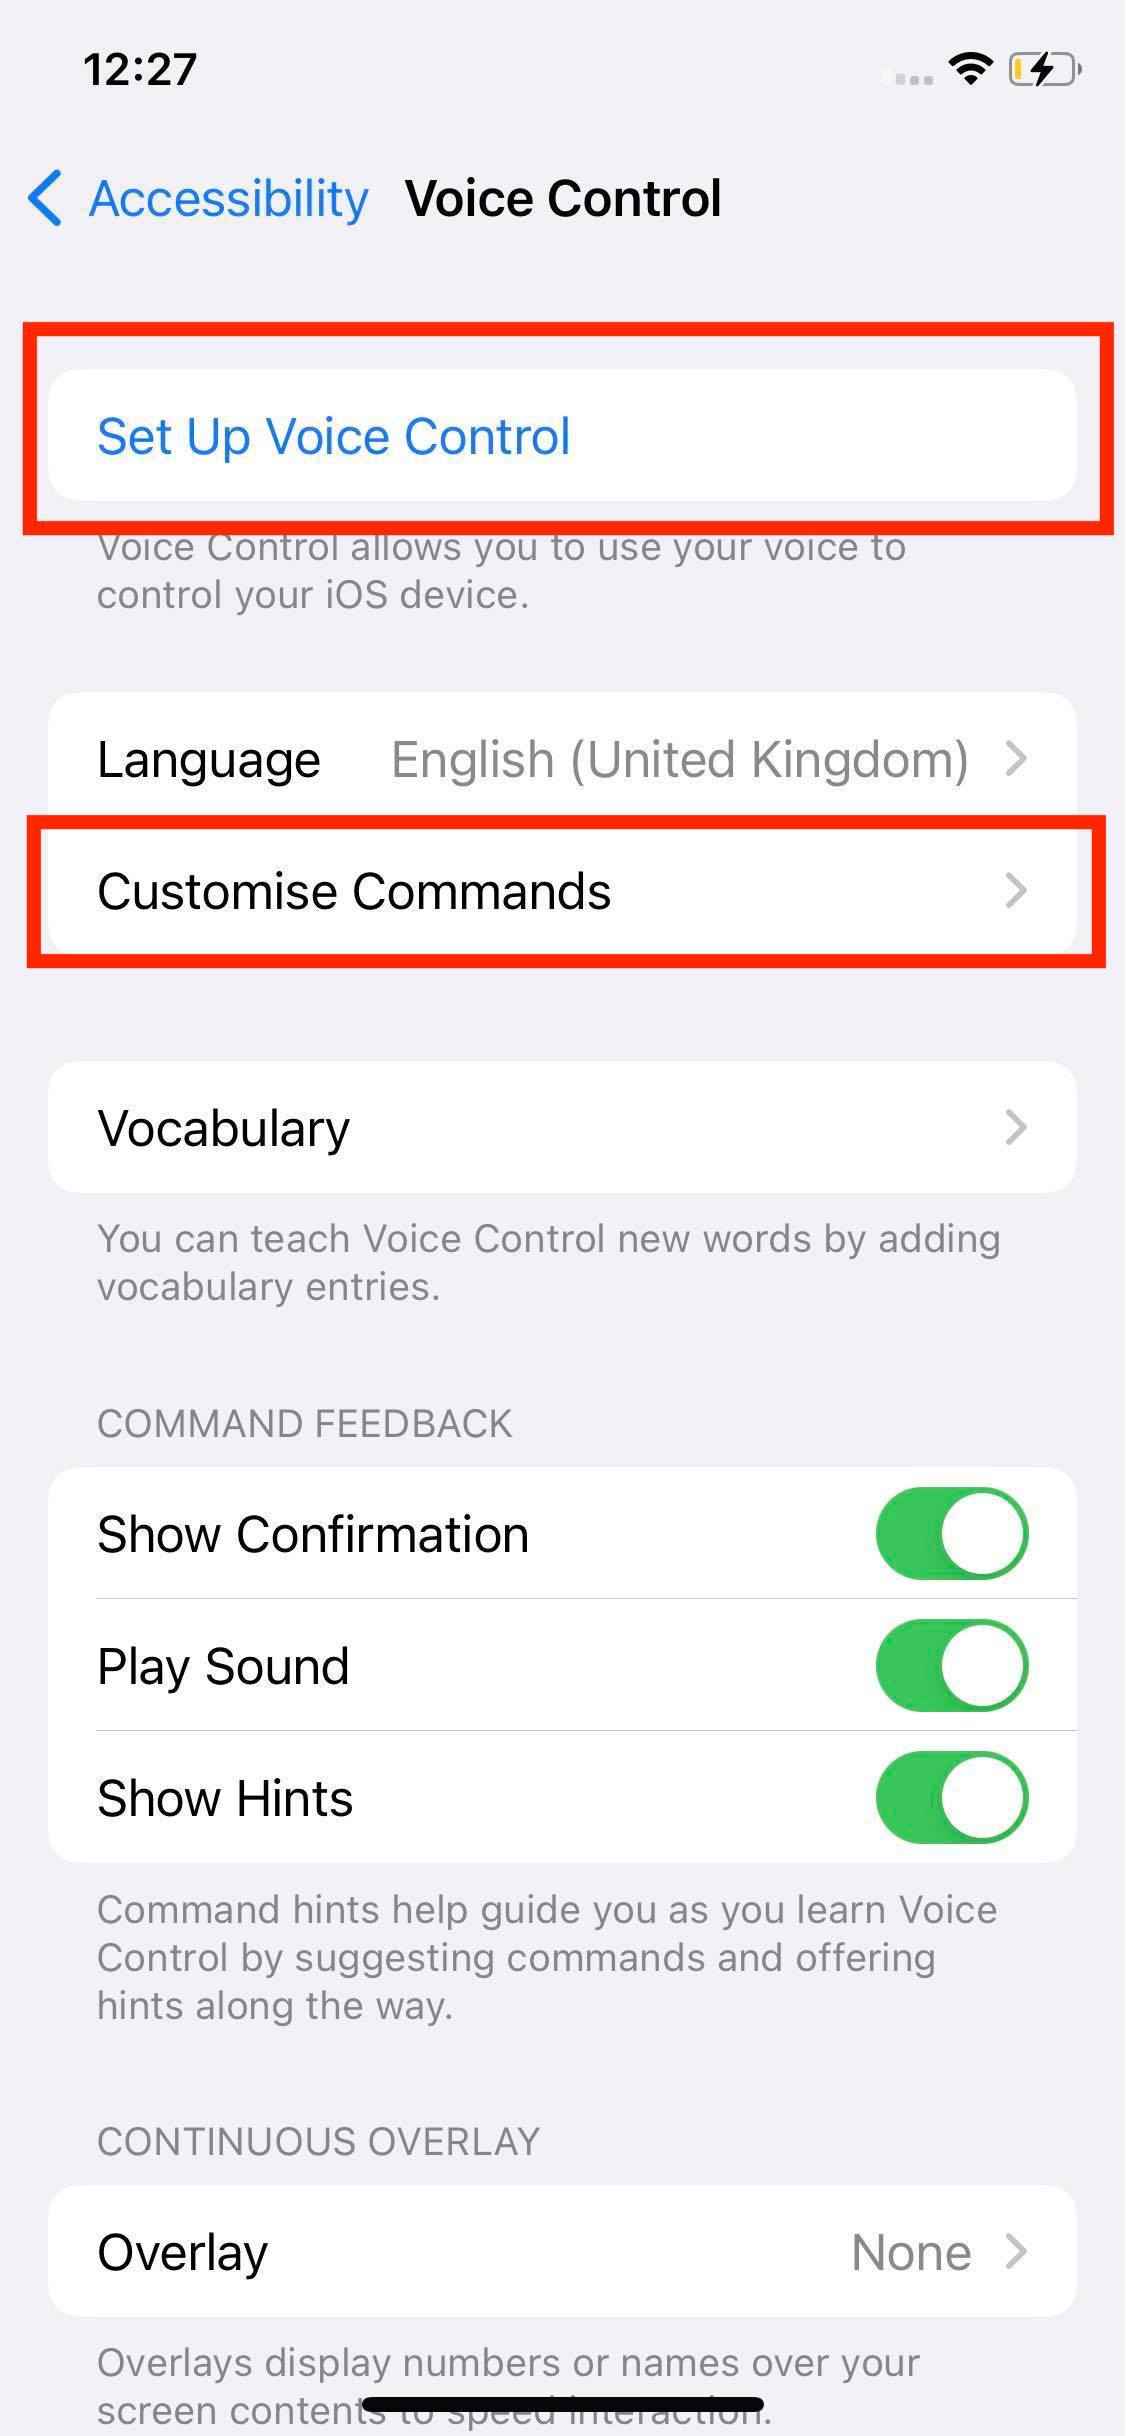 set up voice control and customize commands